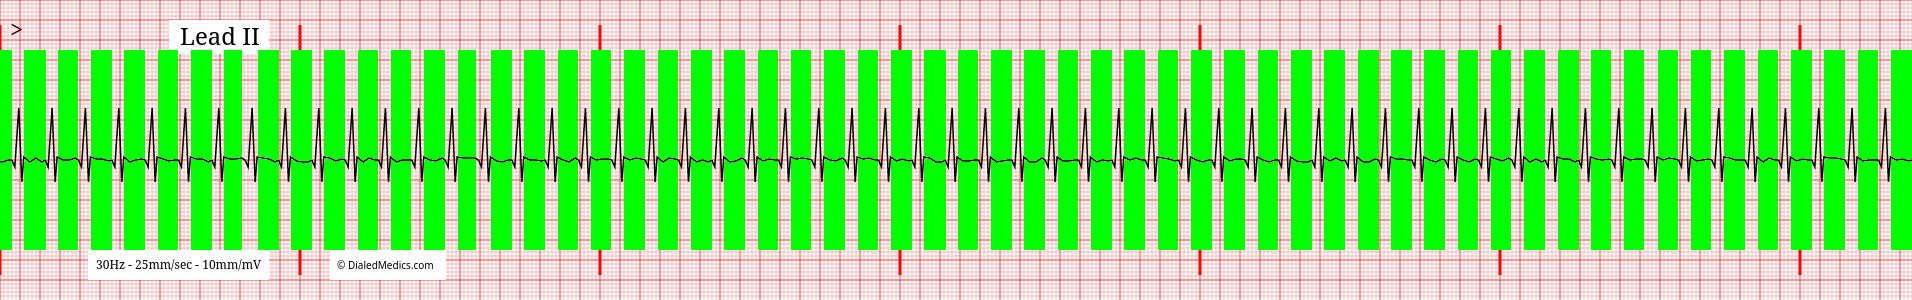 SVT tracing with green highlights over S-Q segments.